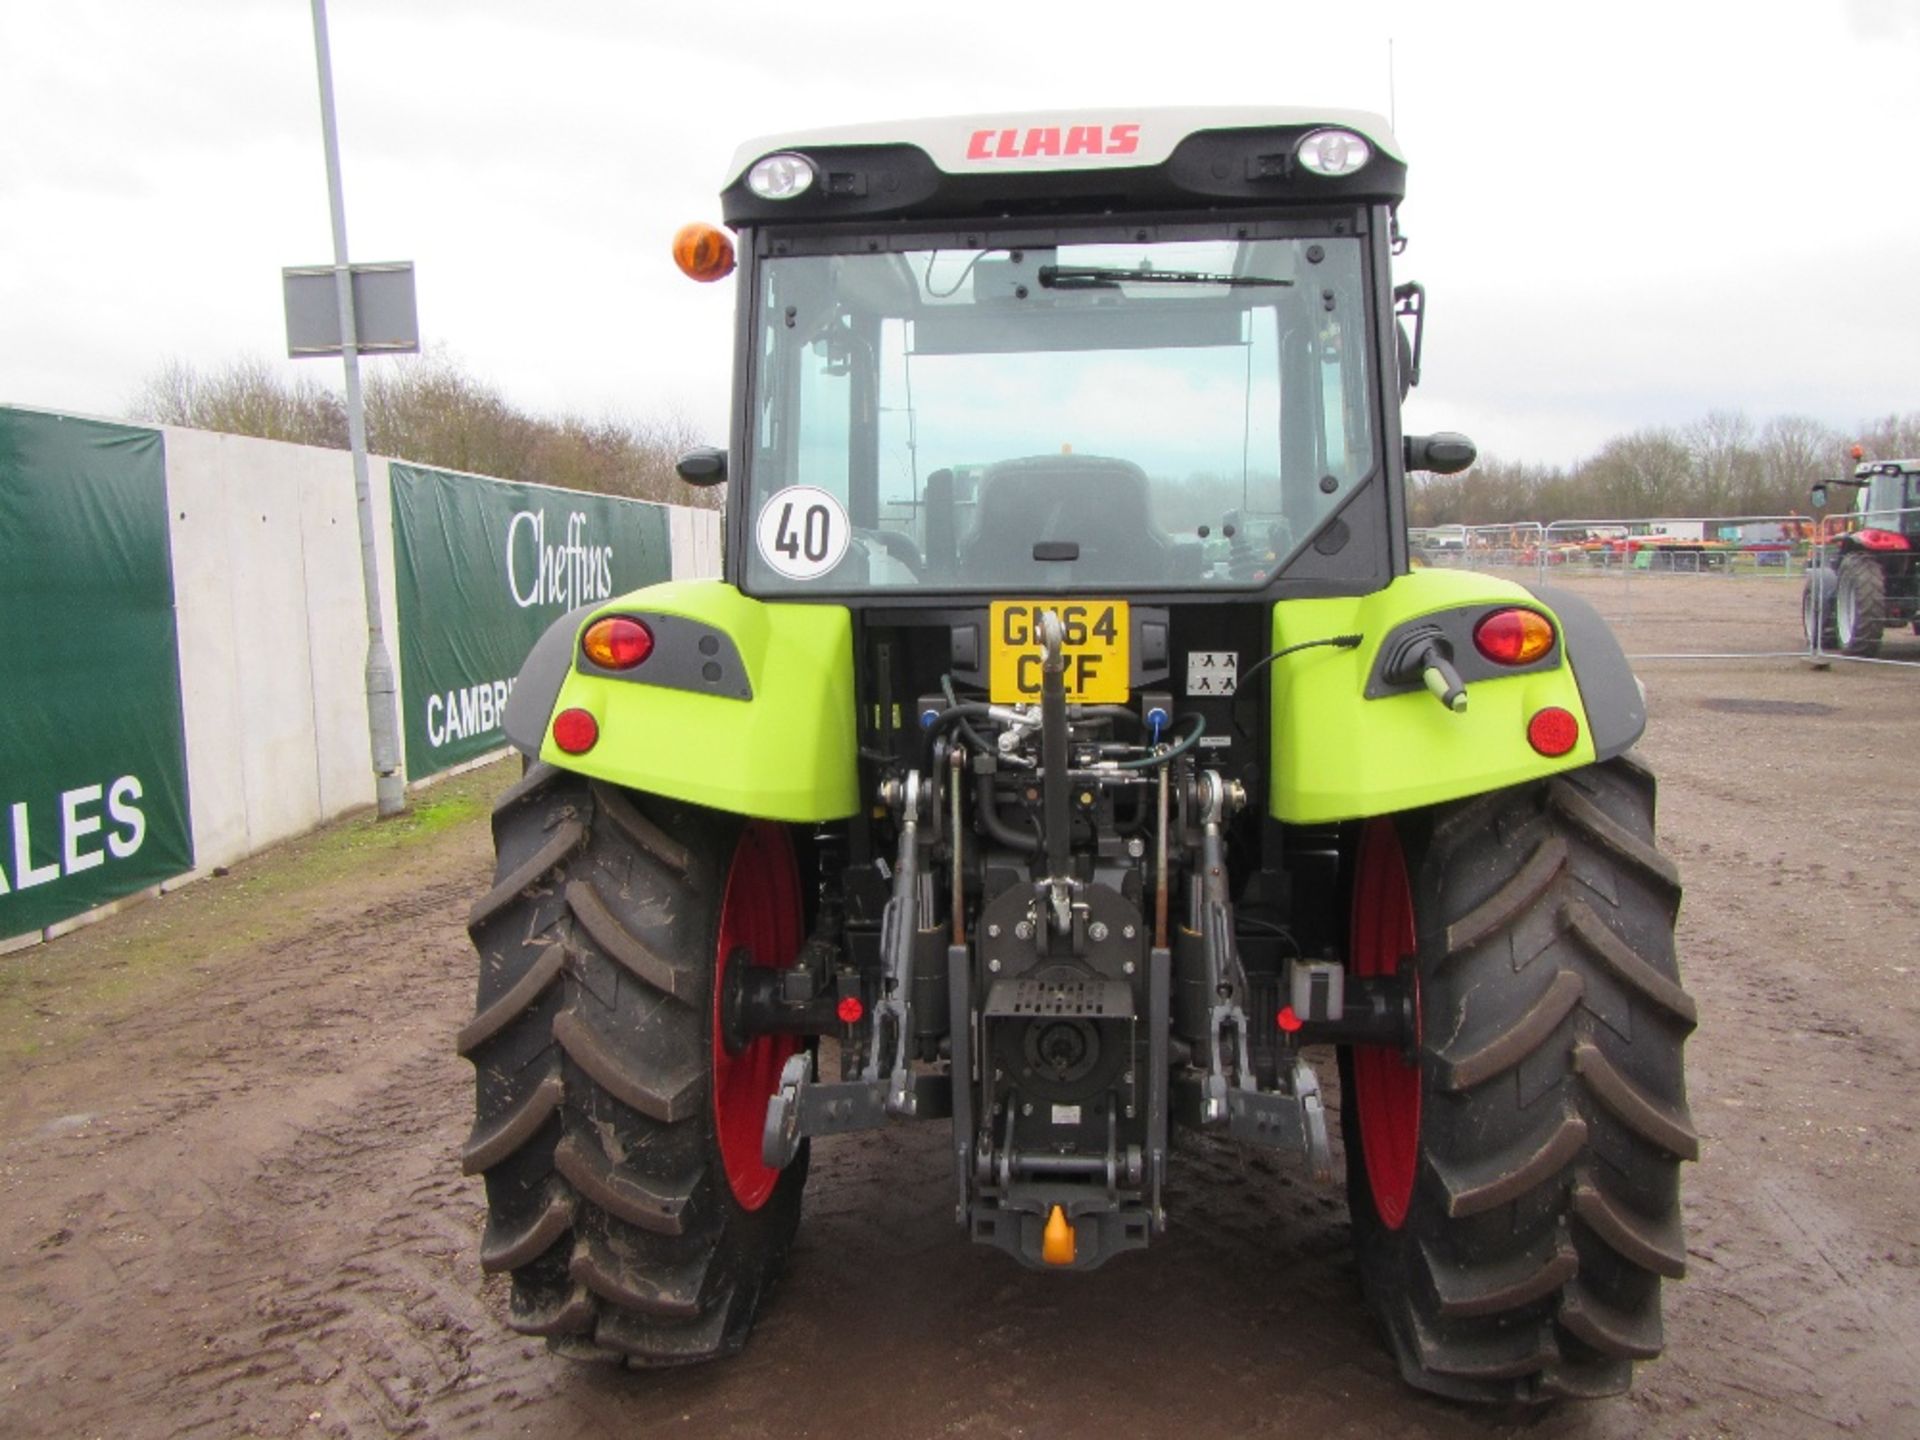 2014 Claas Axos 340C Tractor c/w Loader 500 Hrs Reg No GN64 CZF Ser No 2220597 - Image 6 of 17